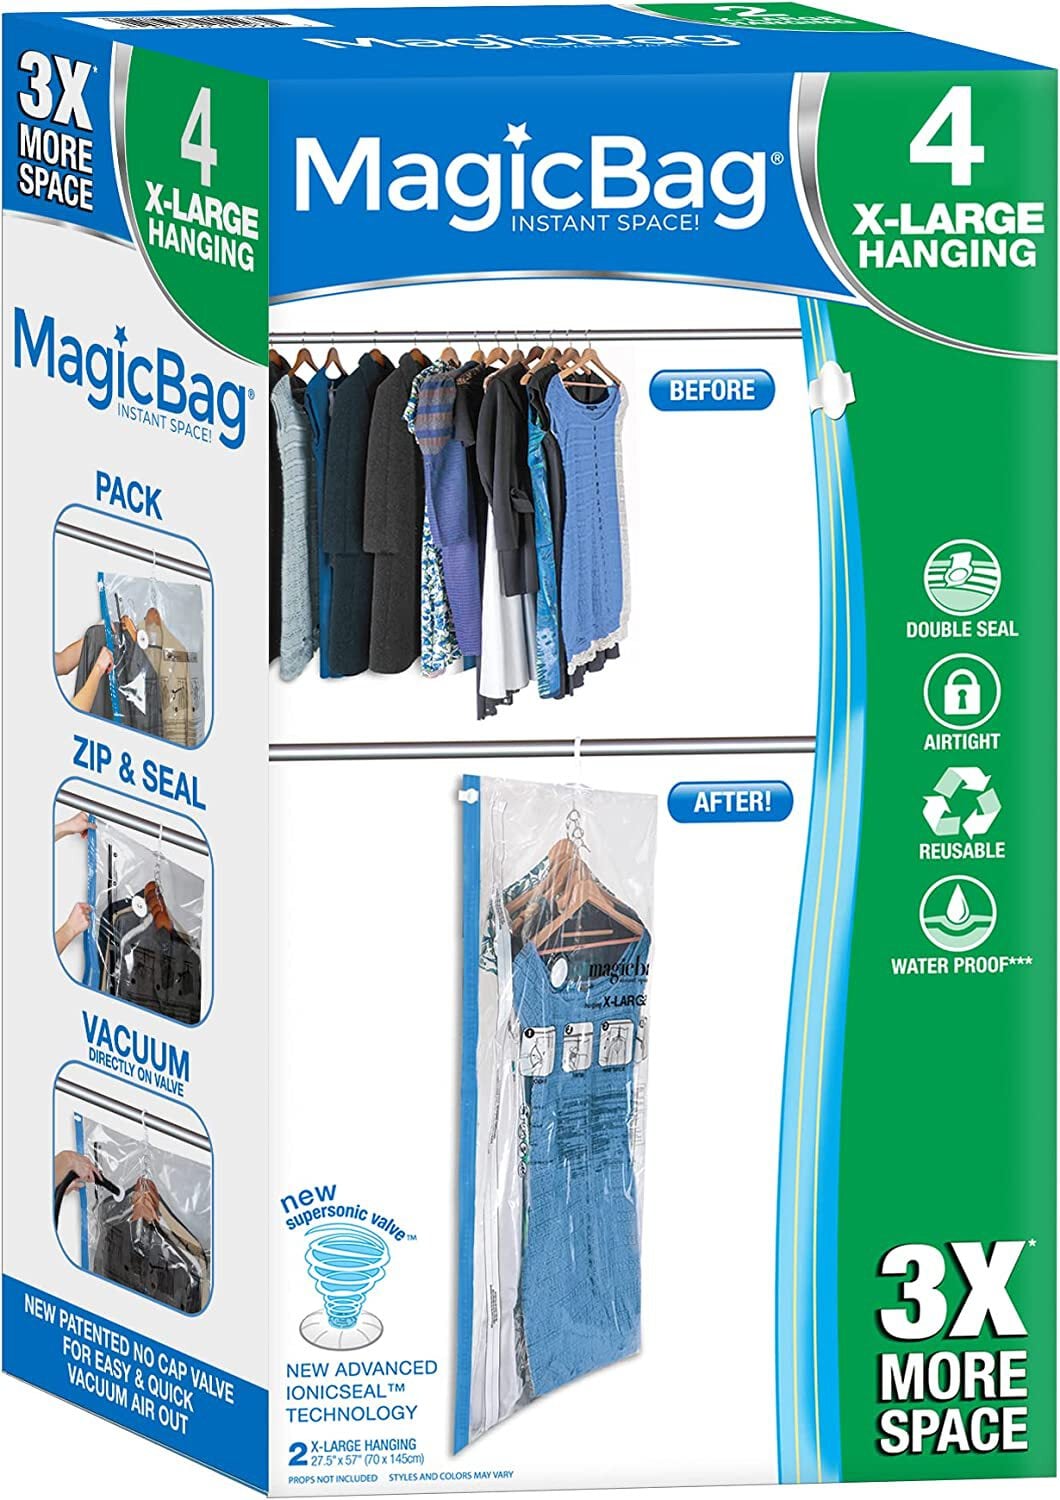 Smart Design MagicBag Space Saver Bags, 4 Hanging Extra Large Storage Bags,  3X More Space, Holds 5 Coats or 10 Dresses in the Vacuum Sealer Accessories  department at